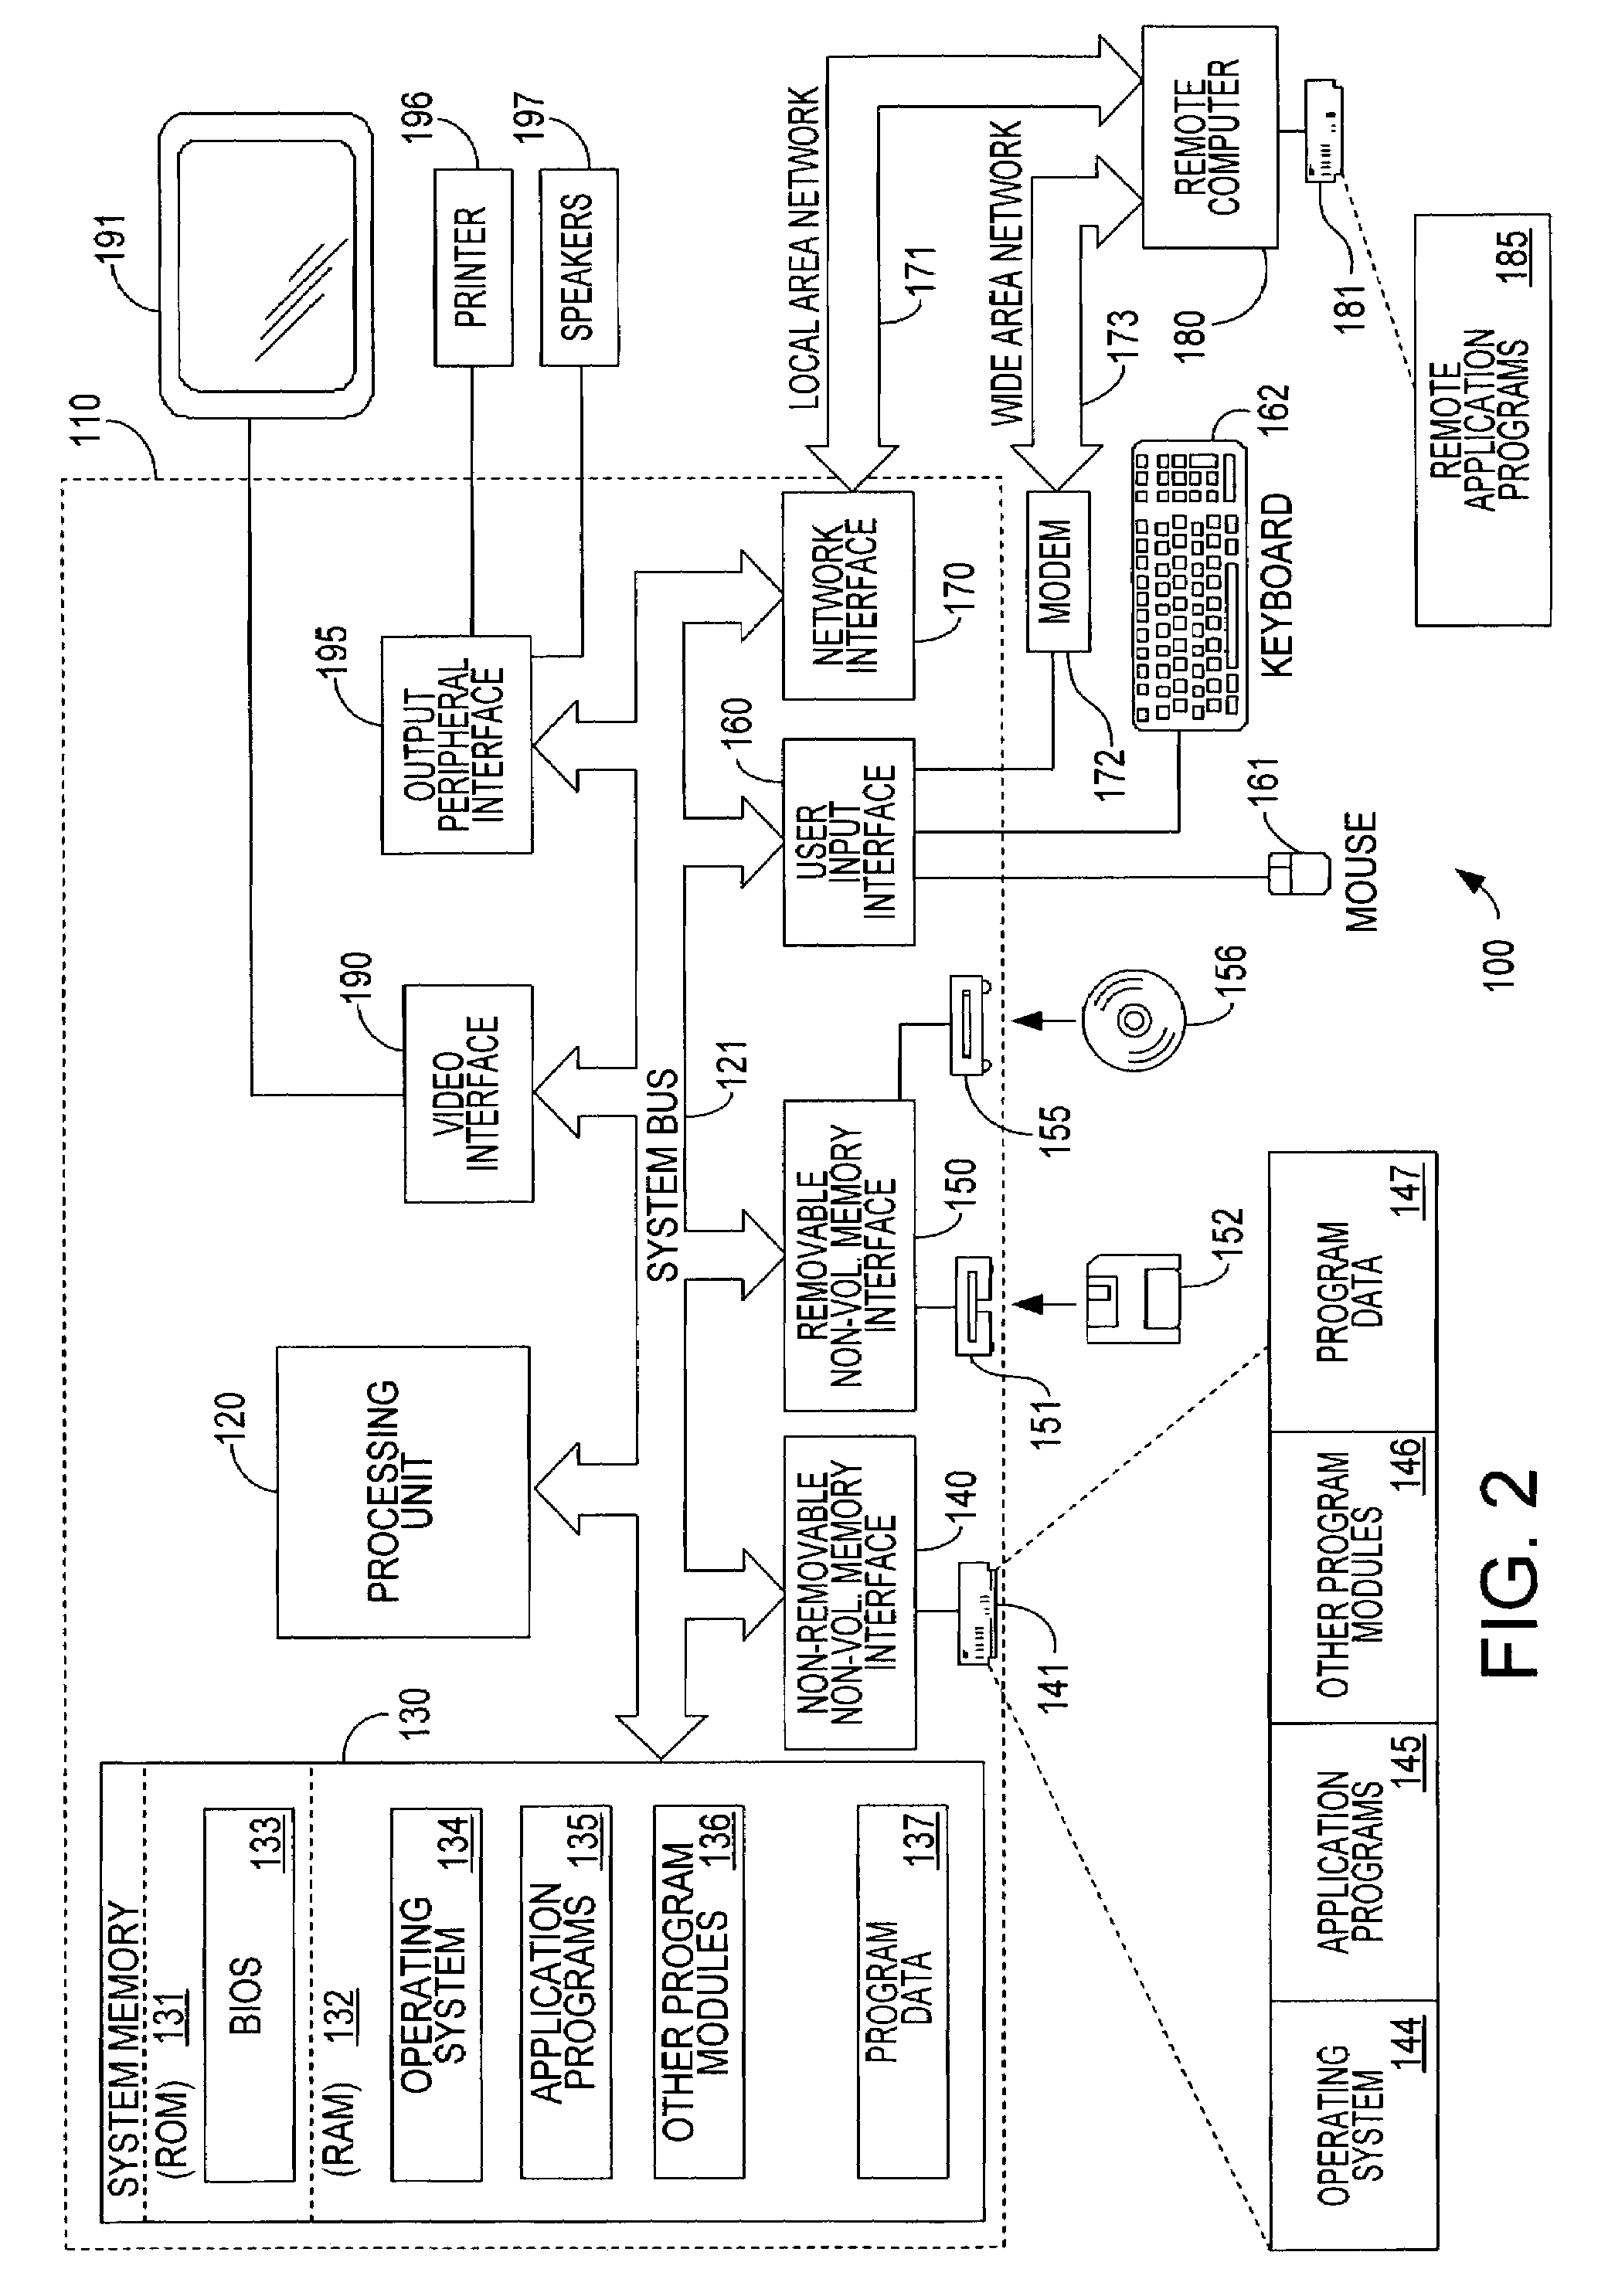 System and method to automate the management of computer services and programmable devices